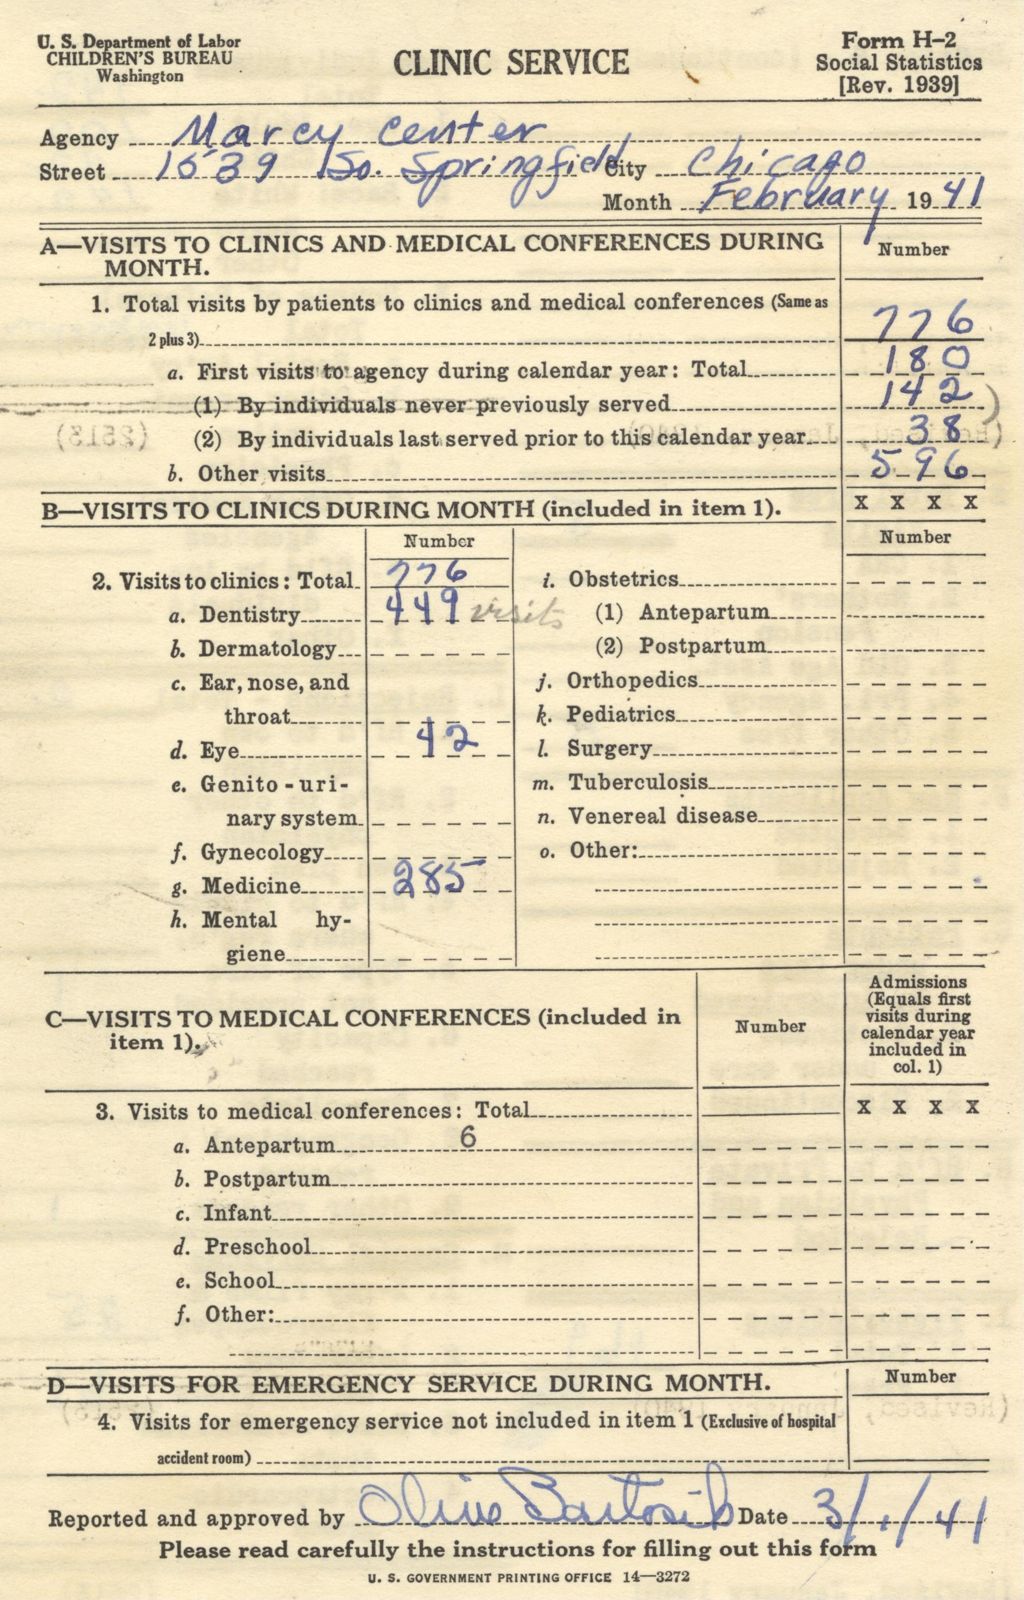 Miniature of Marcy Center Clinic Service form for February 1941